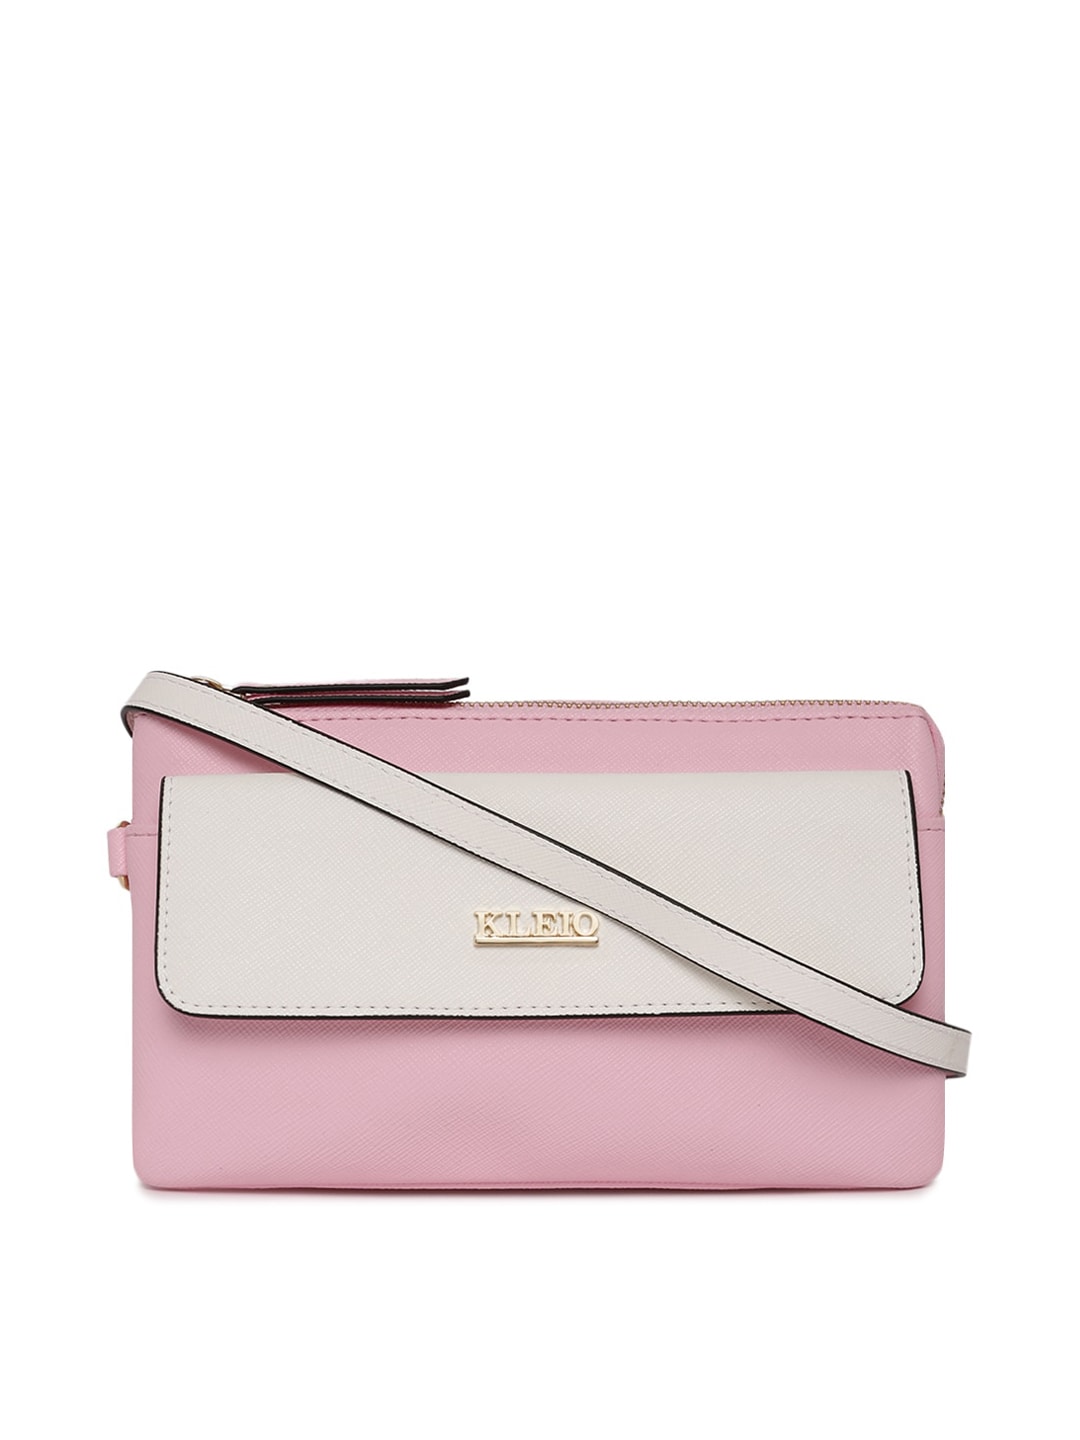 KLEIO Pink Colourblocked PU Structured Sling Bag Price in India